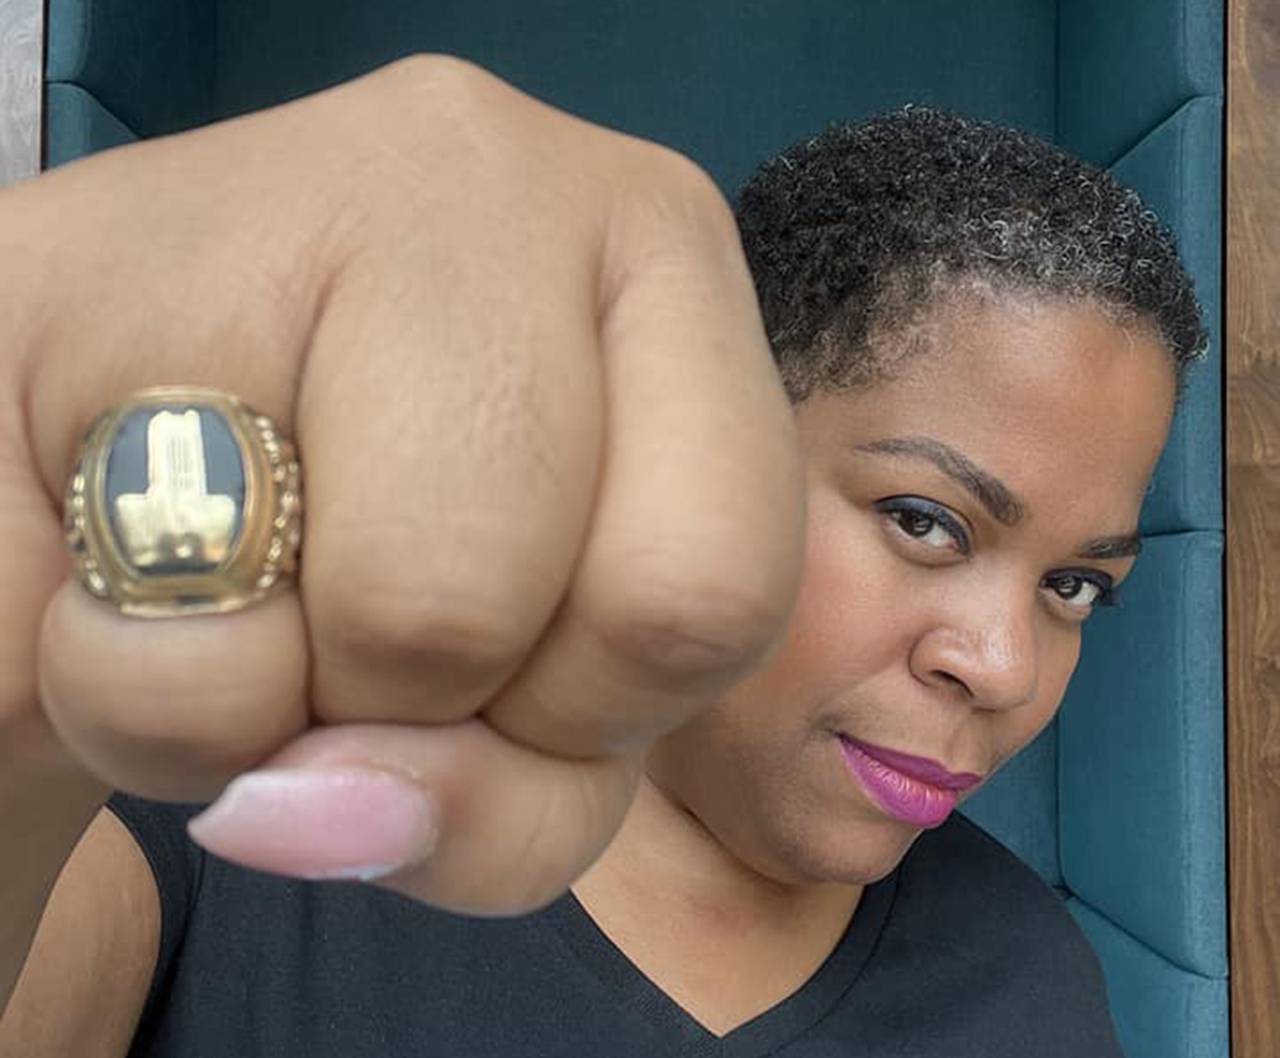 Caron LeNoir, Class of ’90, has worn her ring always, even when her finger swelled during her last pregnancy and it had to be cut off